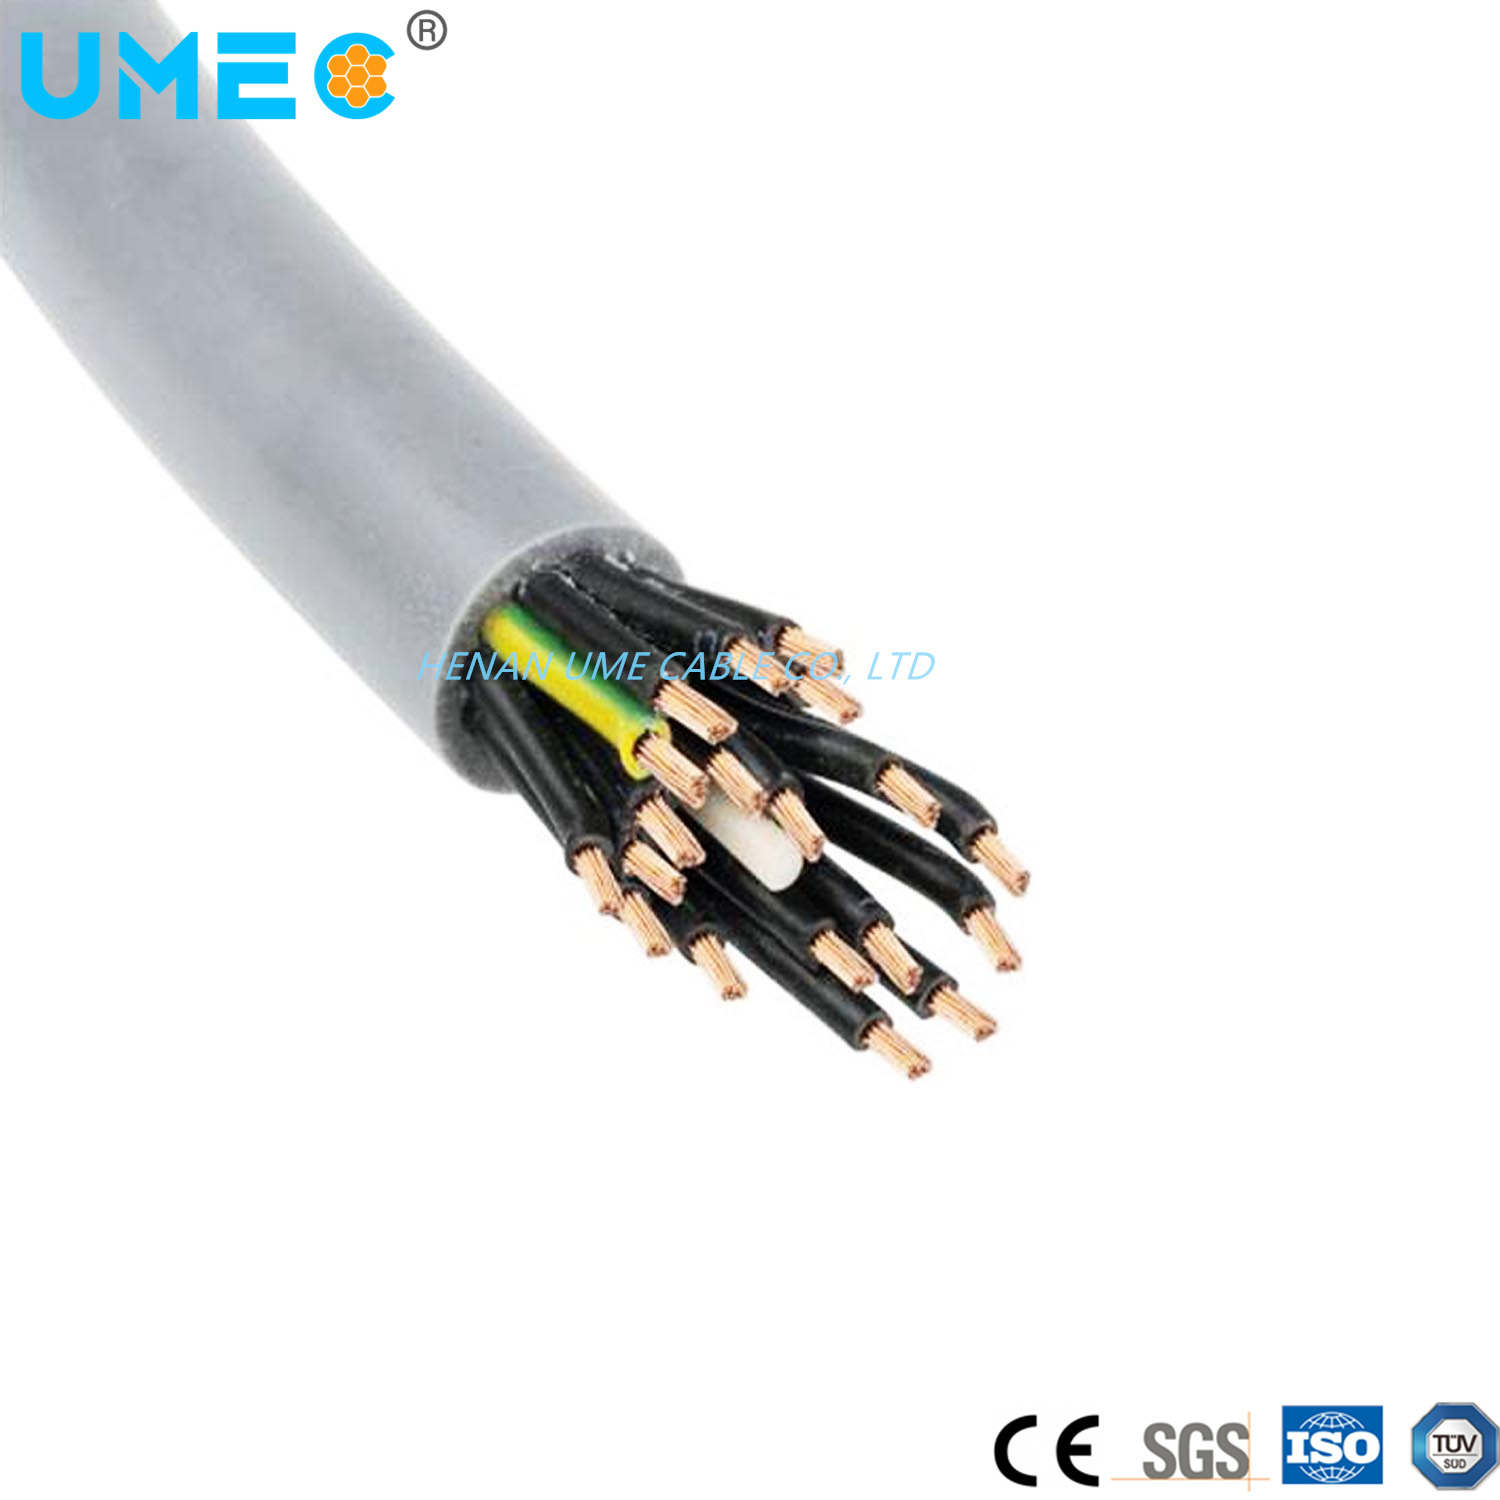 Wholesale Multicore Cord 2 3 4 5 Corex0.75mm 1.5mm 2.5mm 4mm 16mm 50mm 95mm Flexible Ysly Cable